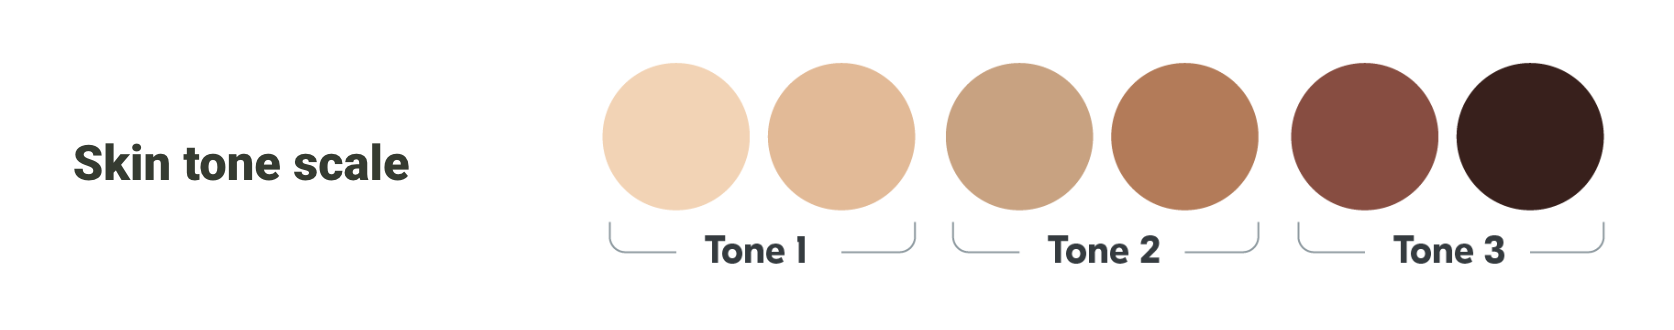 An image showing how the six different skin tones are grouped into three groups. Each skin tone is represented by a circle ranging from light to dark. The first two circles form the group known as "Skin Tone 1", the third and fourth circles form "Skin Tone 2" and the final two circles make up "Skin Tone 3".